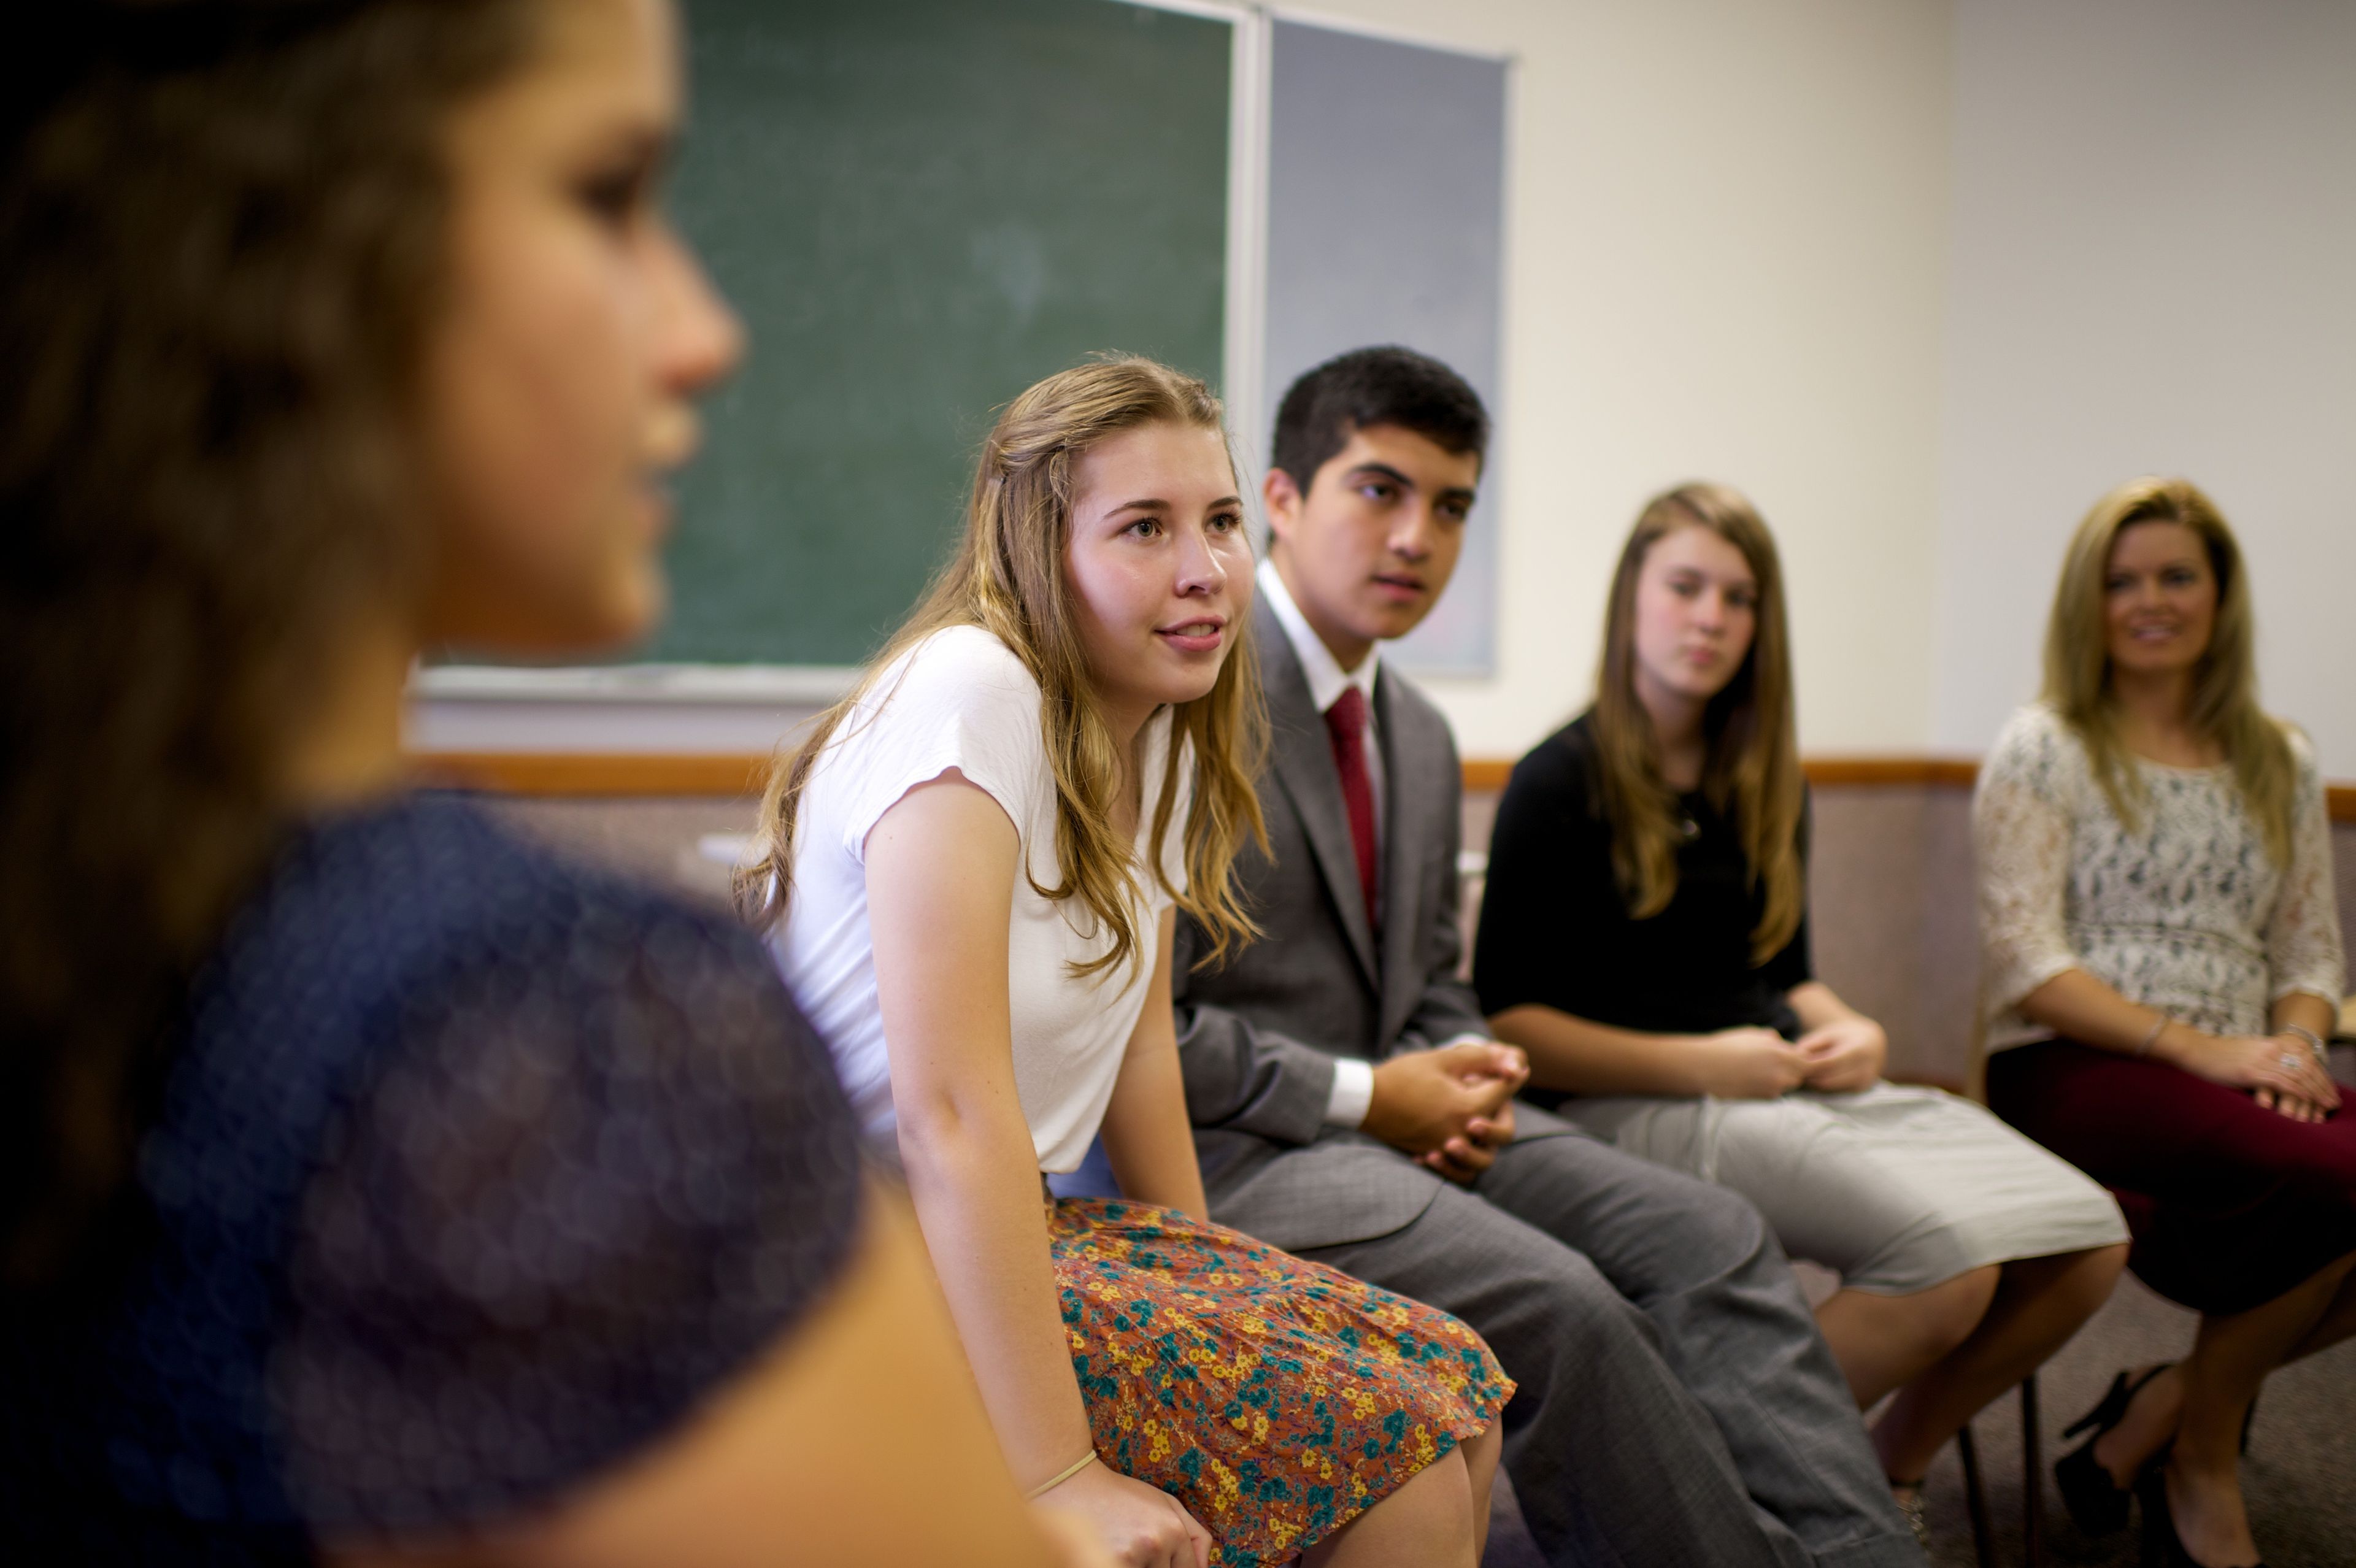 A young woman leans forward in her chair and listens to a teacher in Sunday School surrounded by youth.